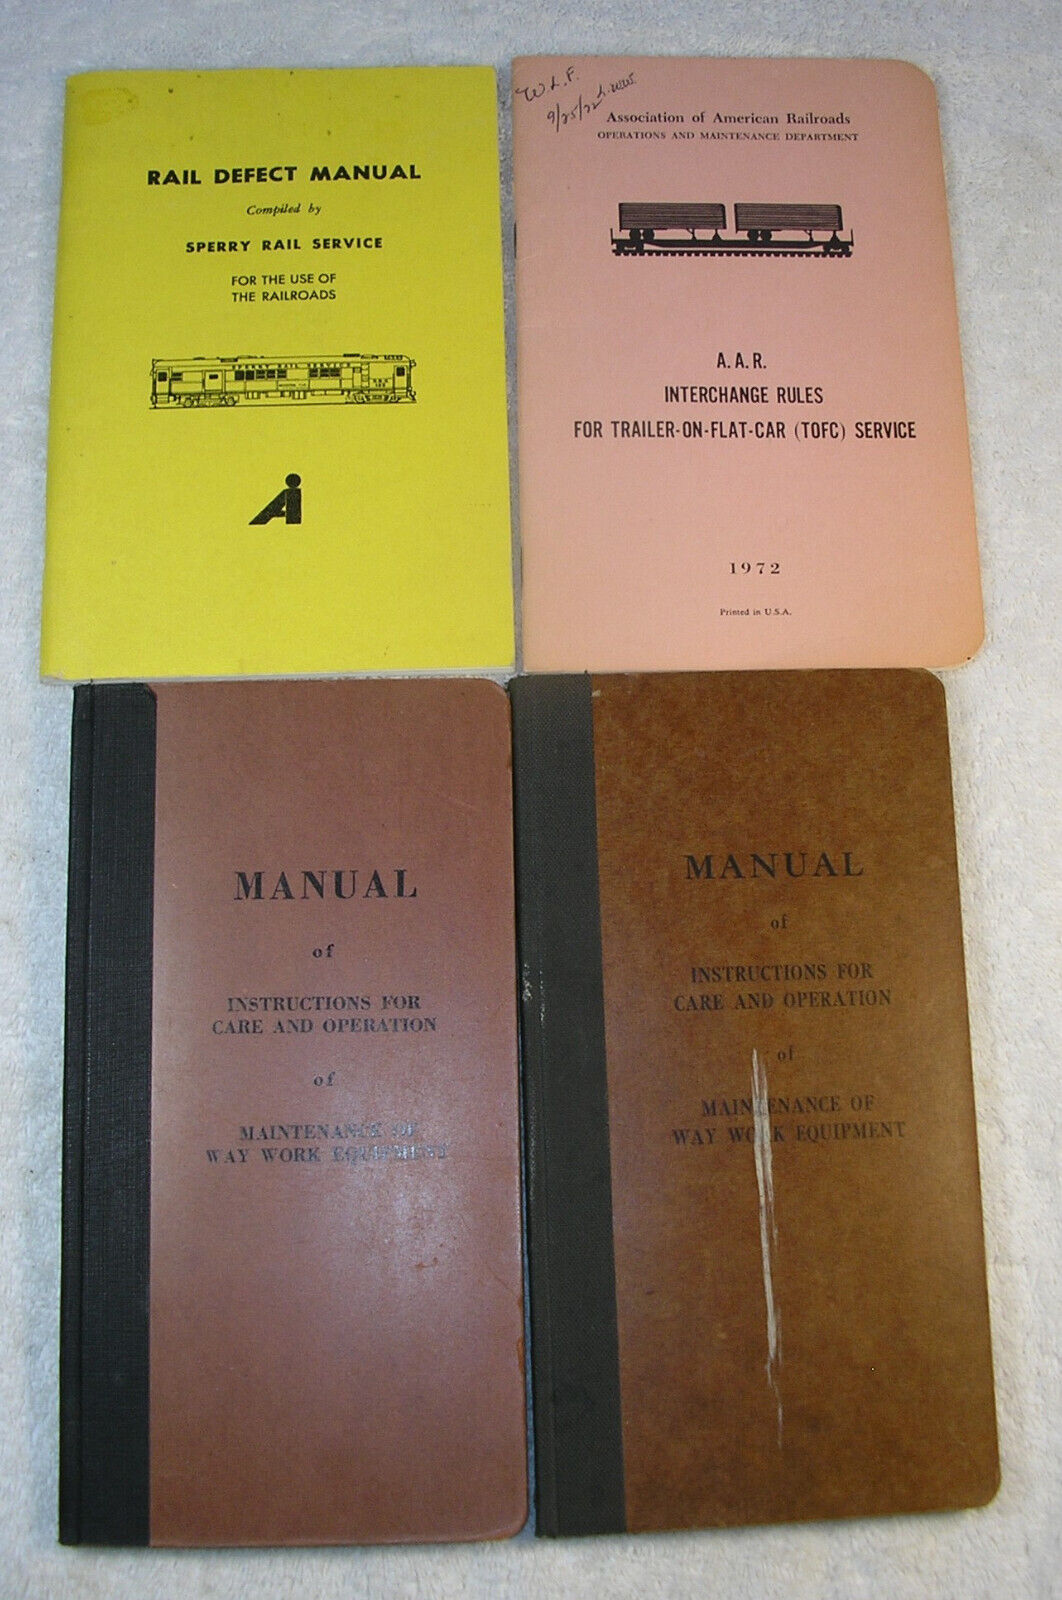 4 Vintage Manuals for Operations of America’s Railroads